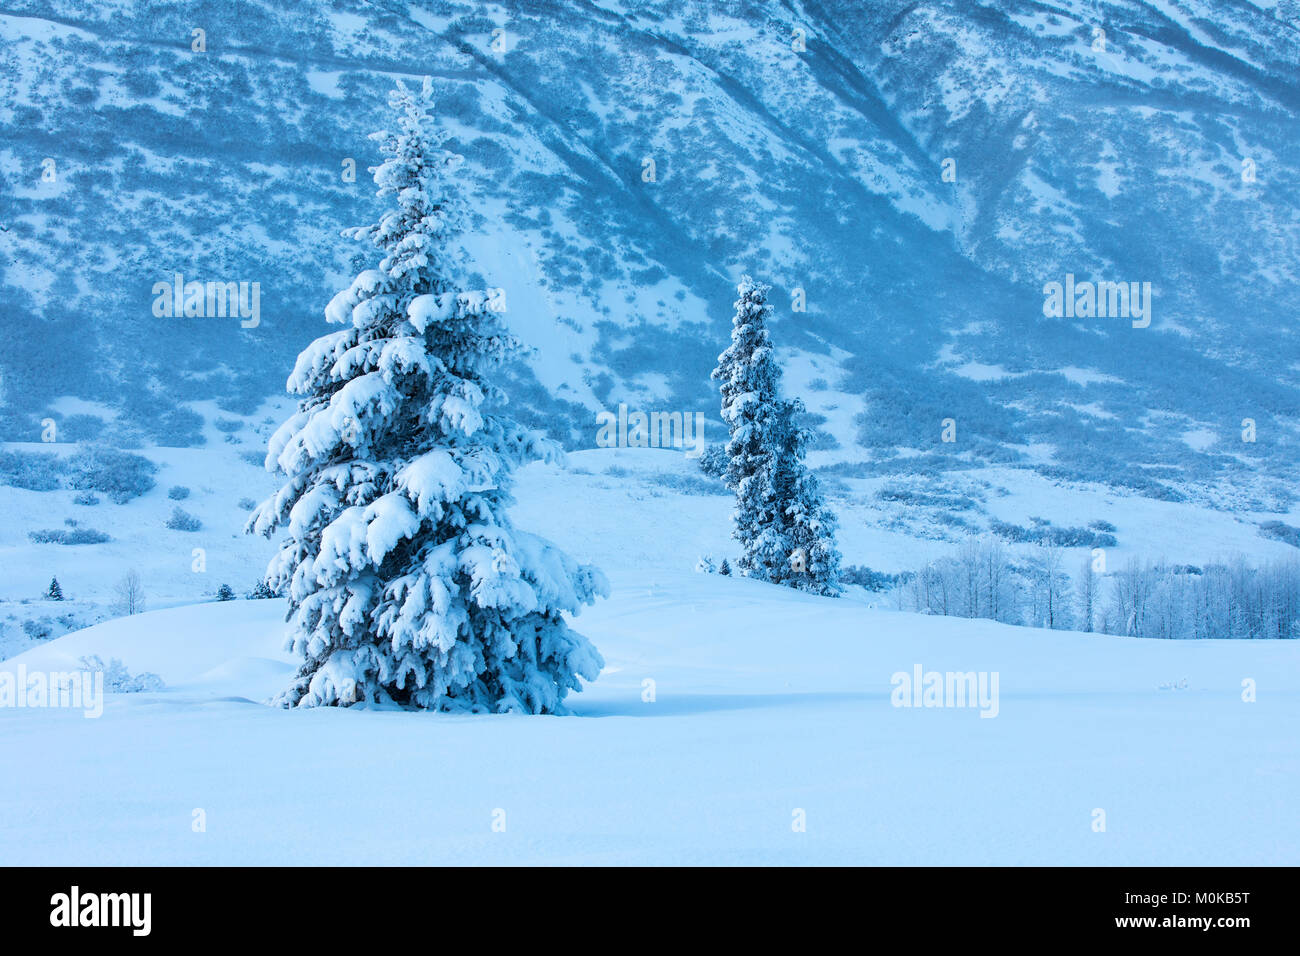 A single spruce tree covered in fresh snow stands in front of a mountainside blanketed in white snow, Turnagain Pass, Kenai Peninsula, South-centra... Stock Photo